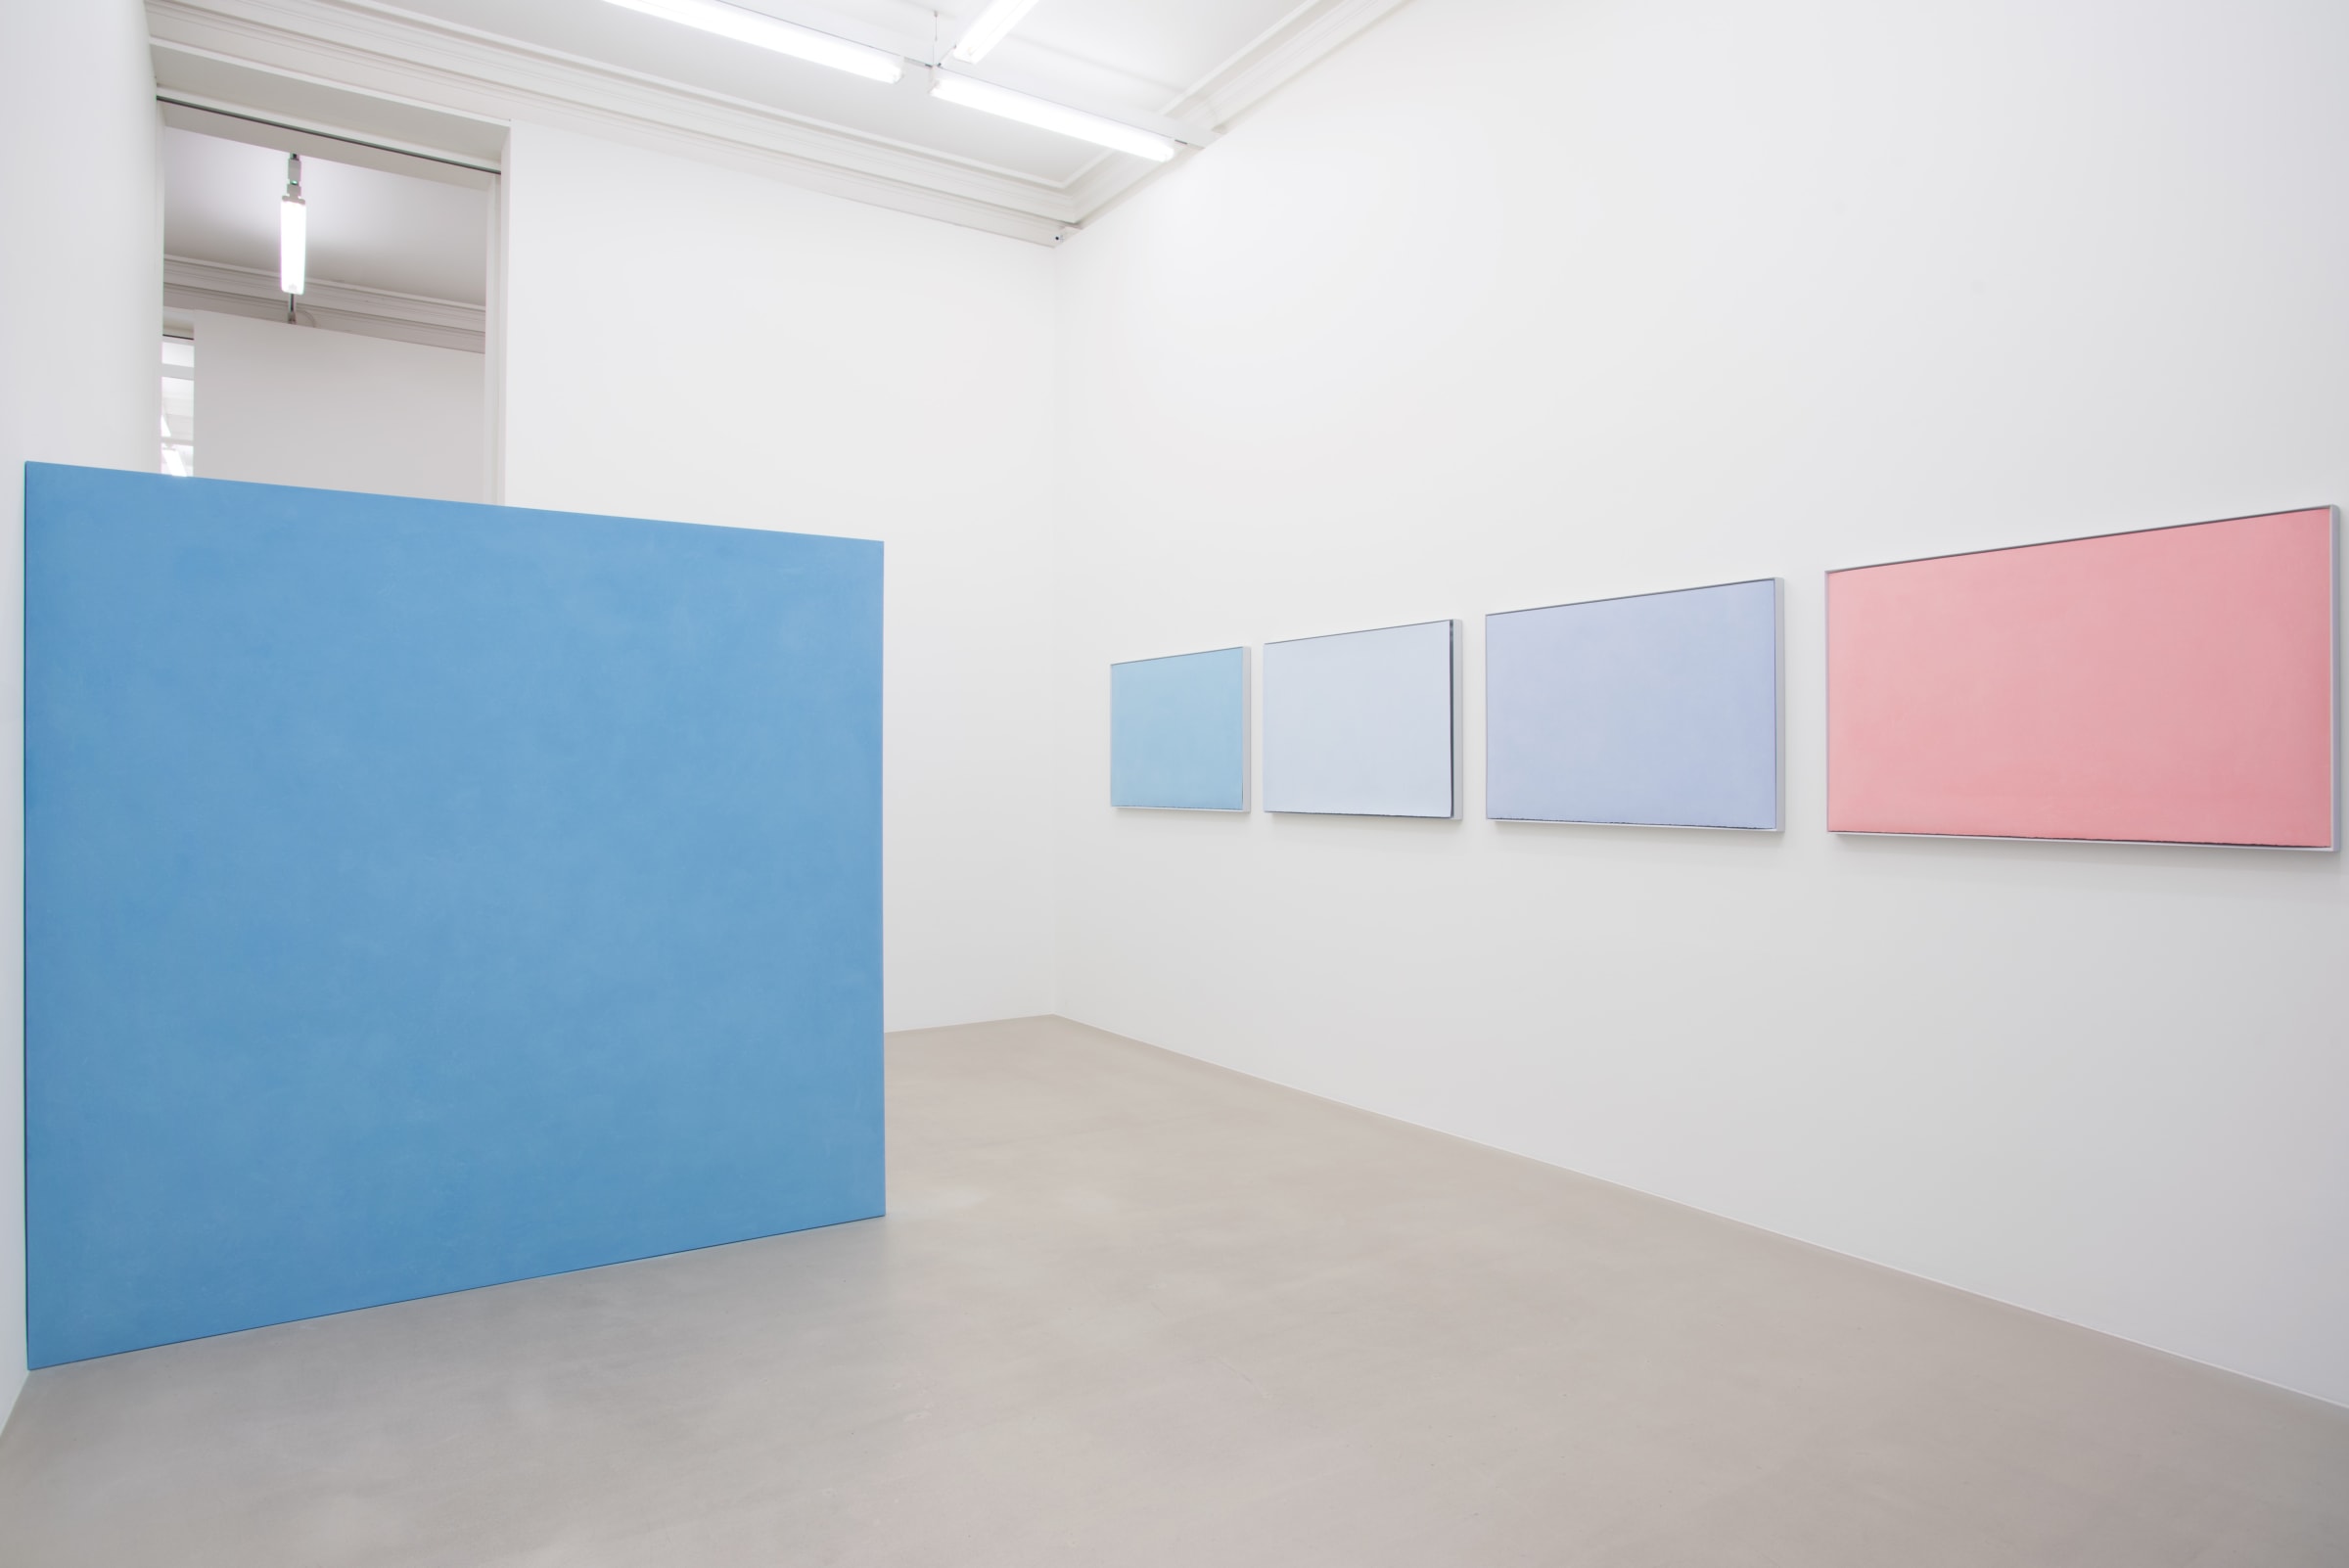 4 pastel colored paintings hang horizontally on the wall on the right. A large, light blue floating wall comes out perpendicularly from the wall on the left. 